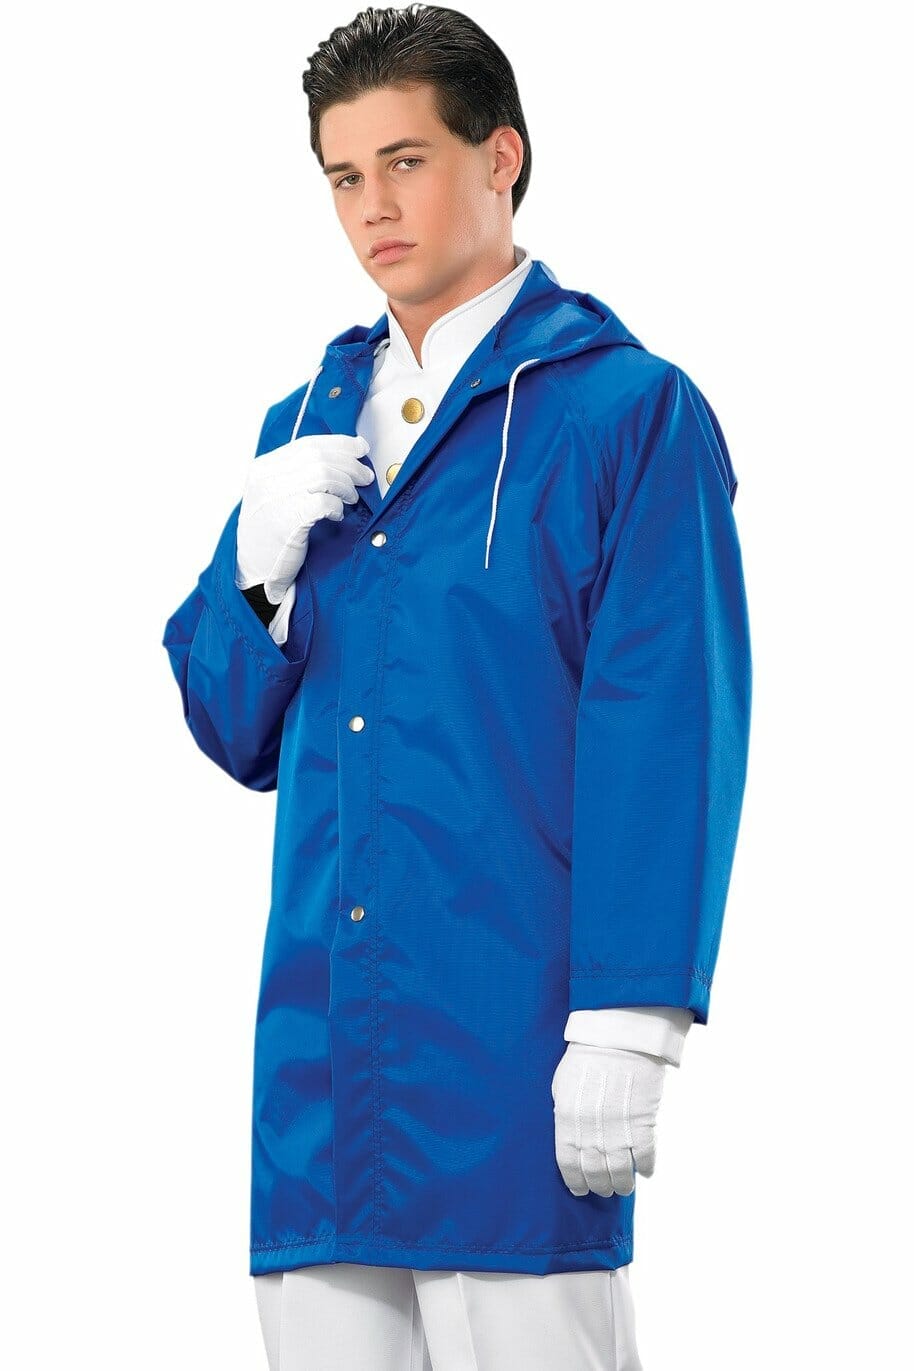 Styleplus MTO Spectra-Lite Raincoats (Unlined, No Pockets) (Available ...